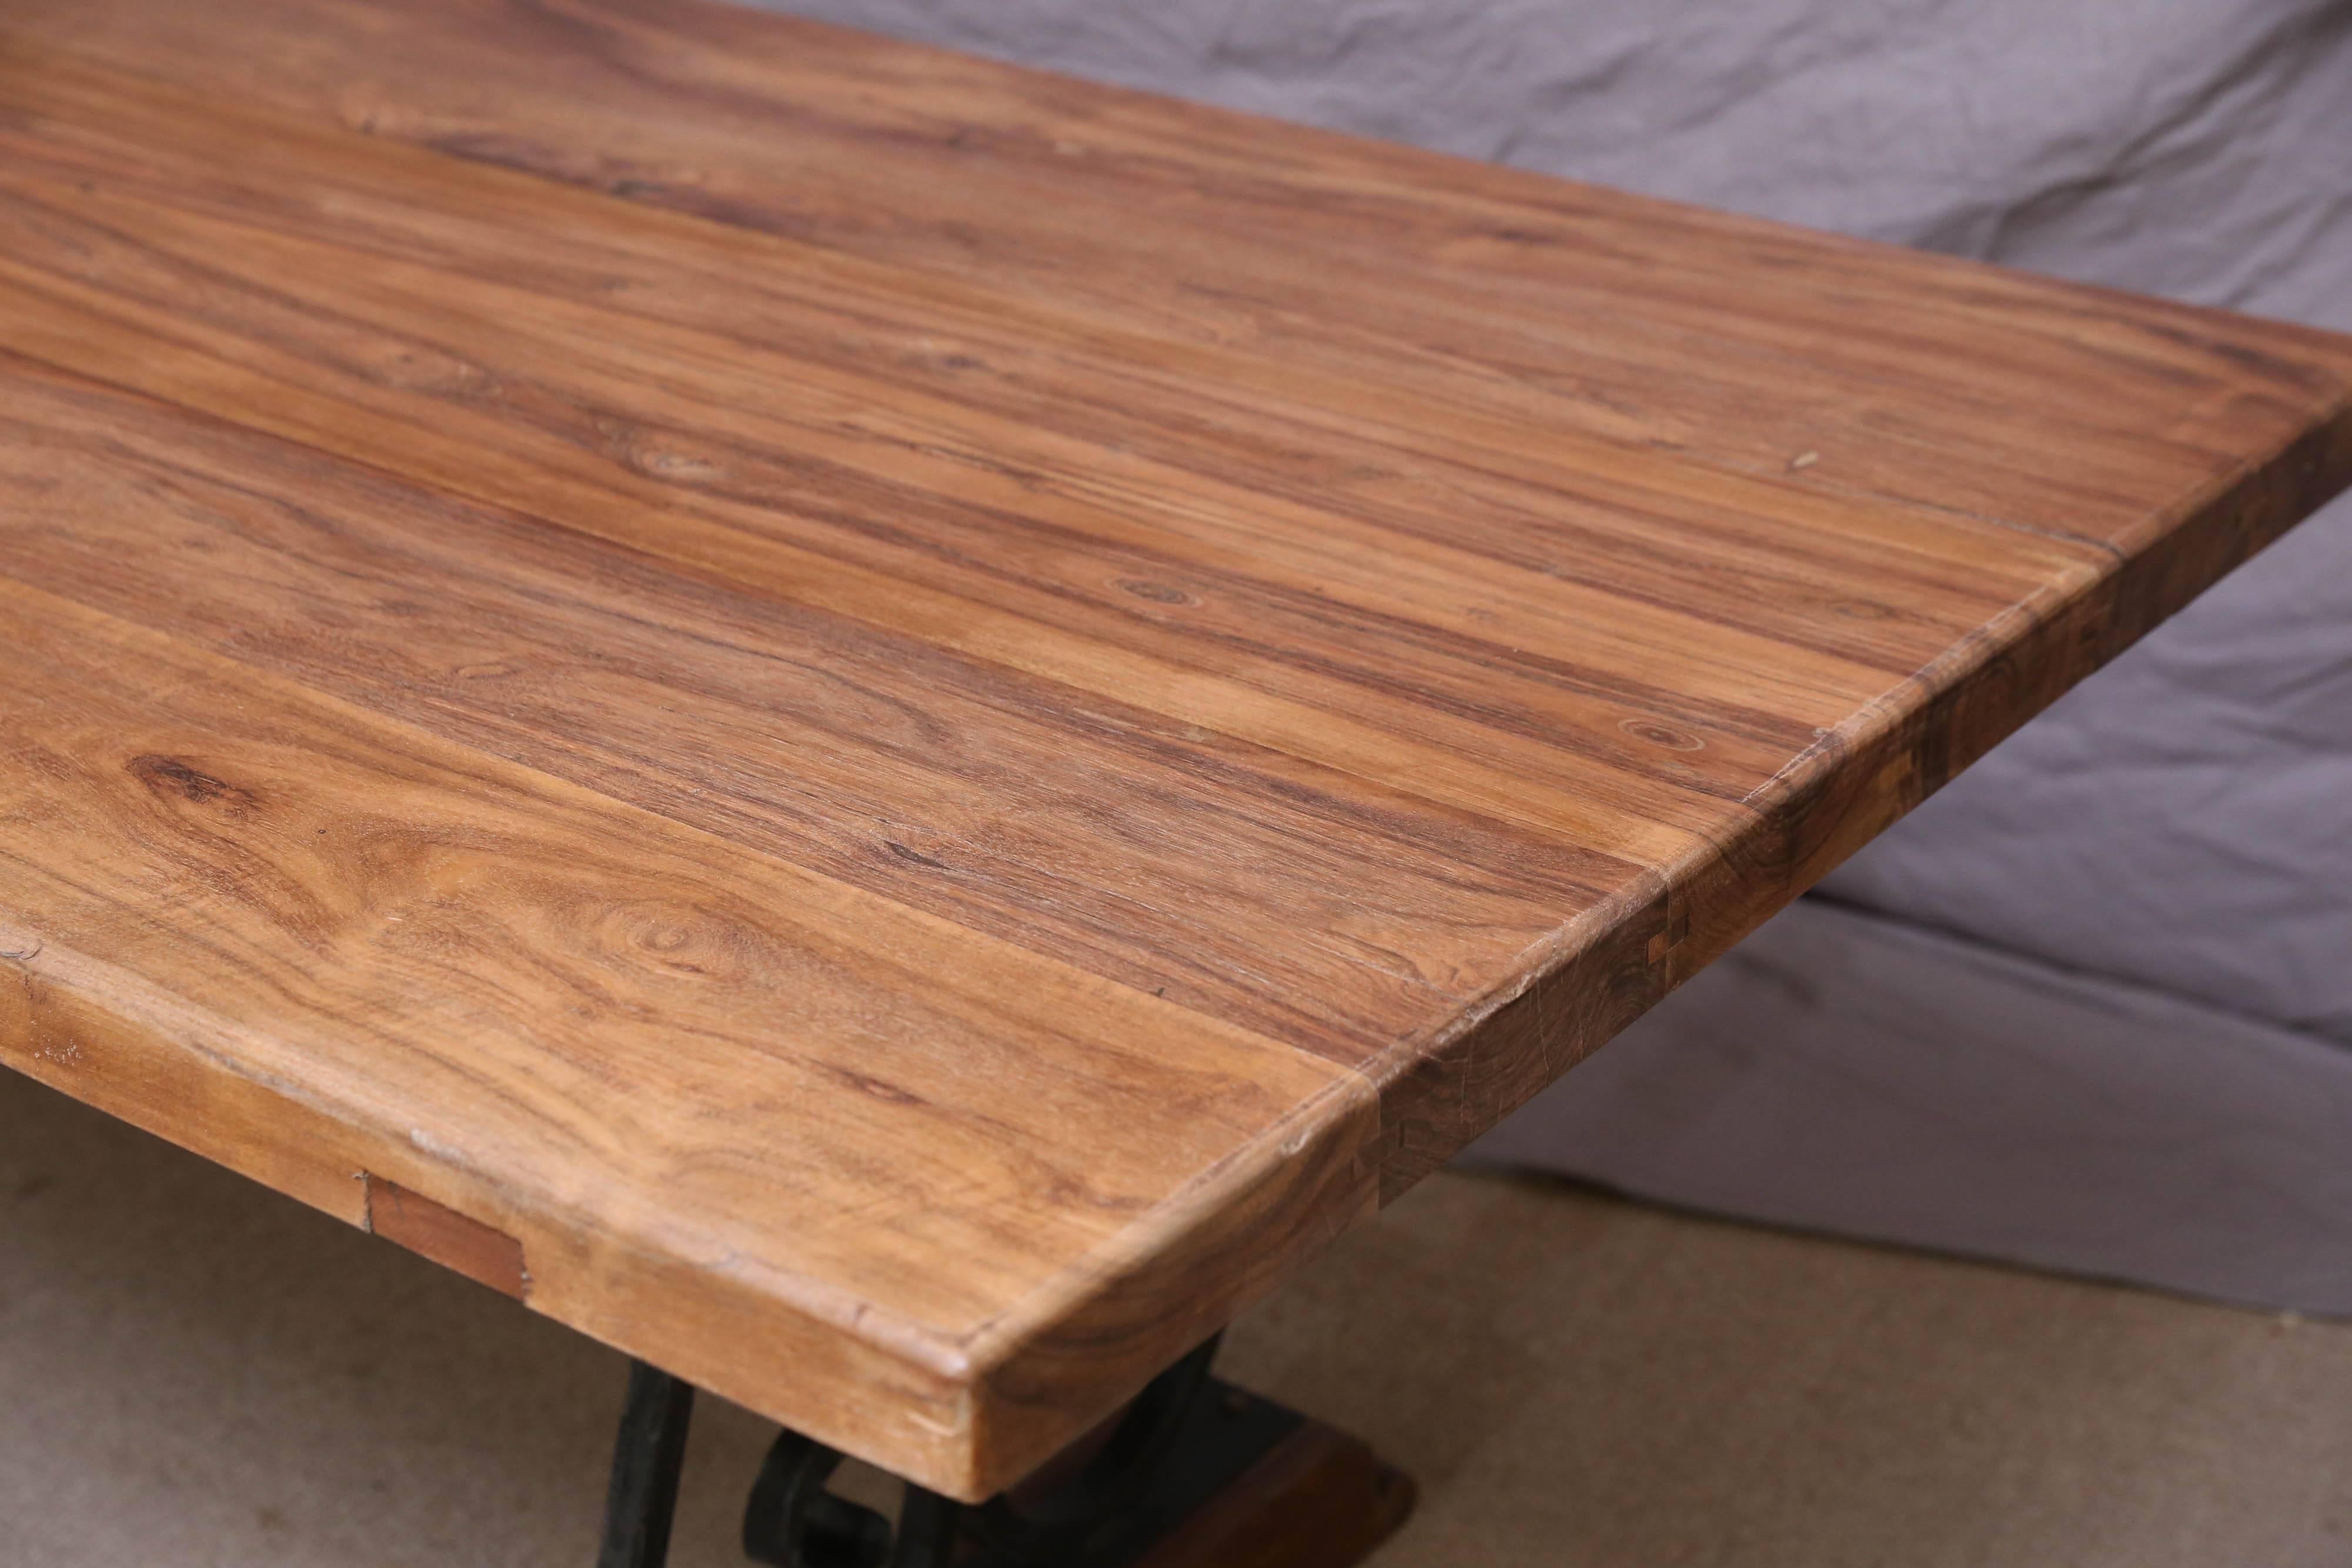 The solid teak wood top comes from a 1920s Dutch colonial farm and the iron base is recently made. The whole top is solid and thick. Note the patina and the fine grain flow on the table top.Finest teak wood was used for the top. To avoid damage to